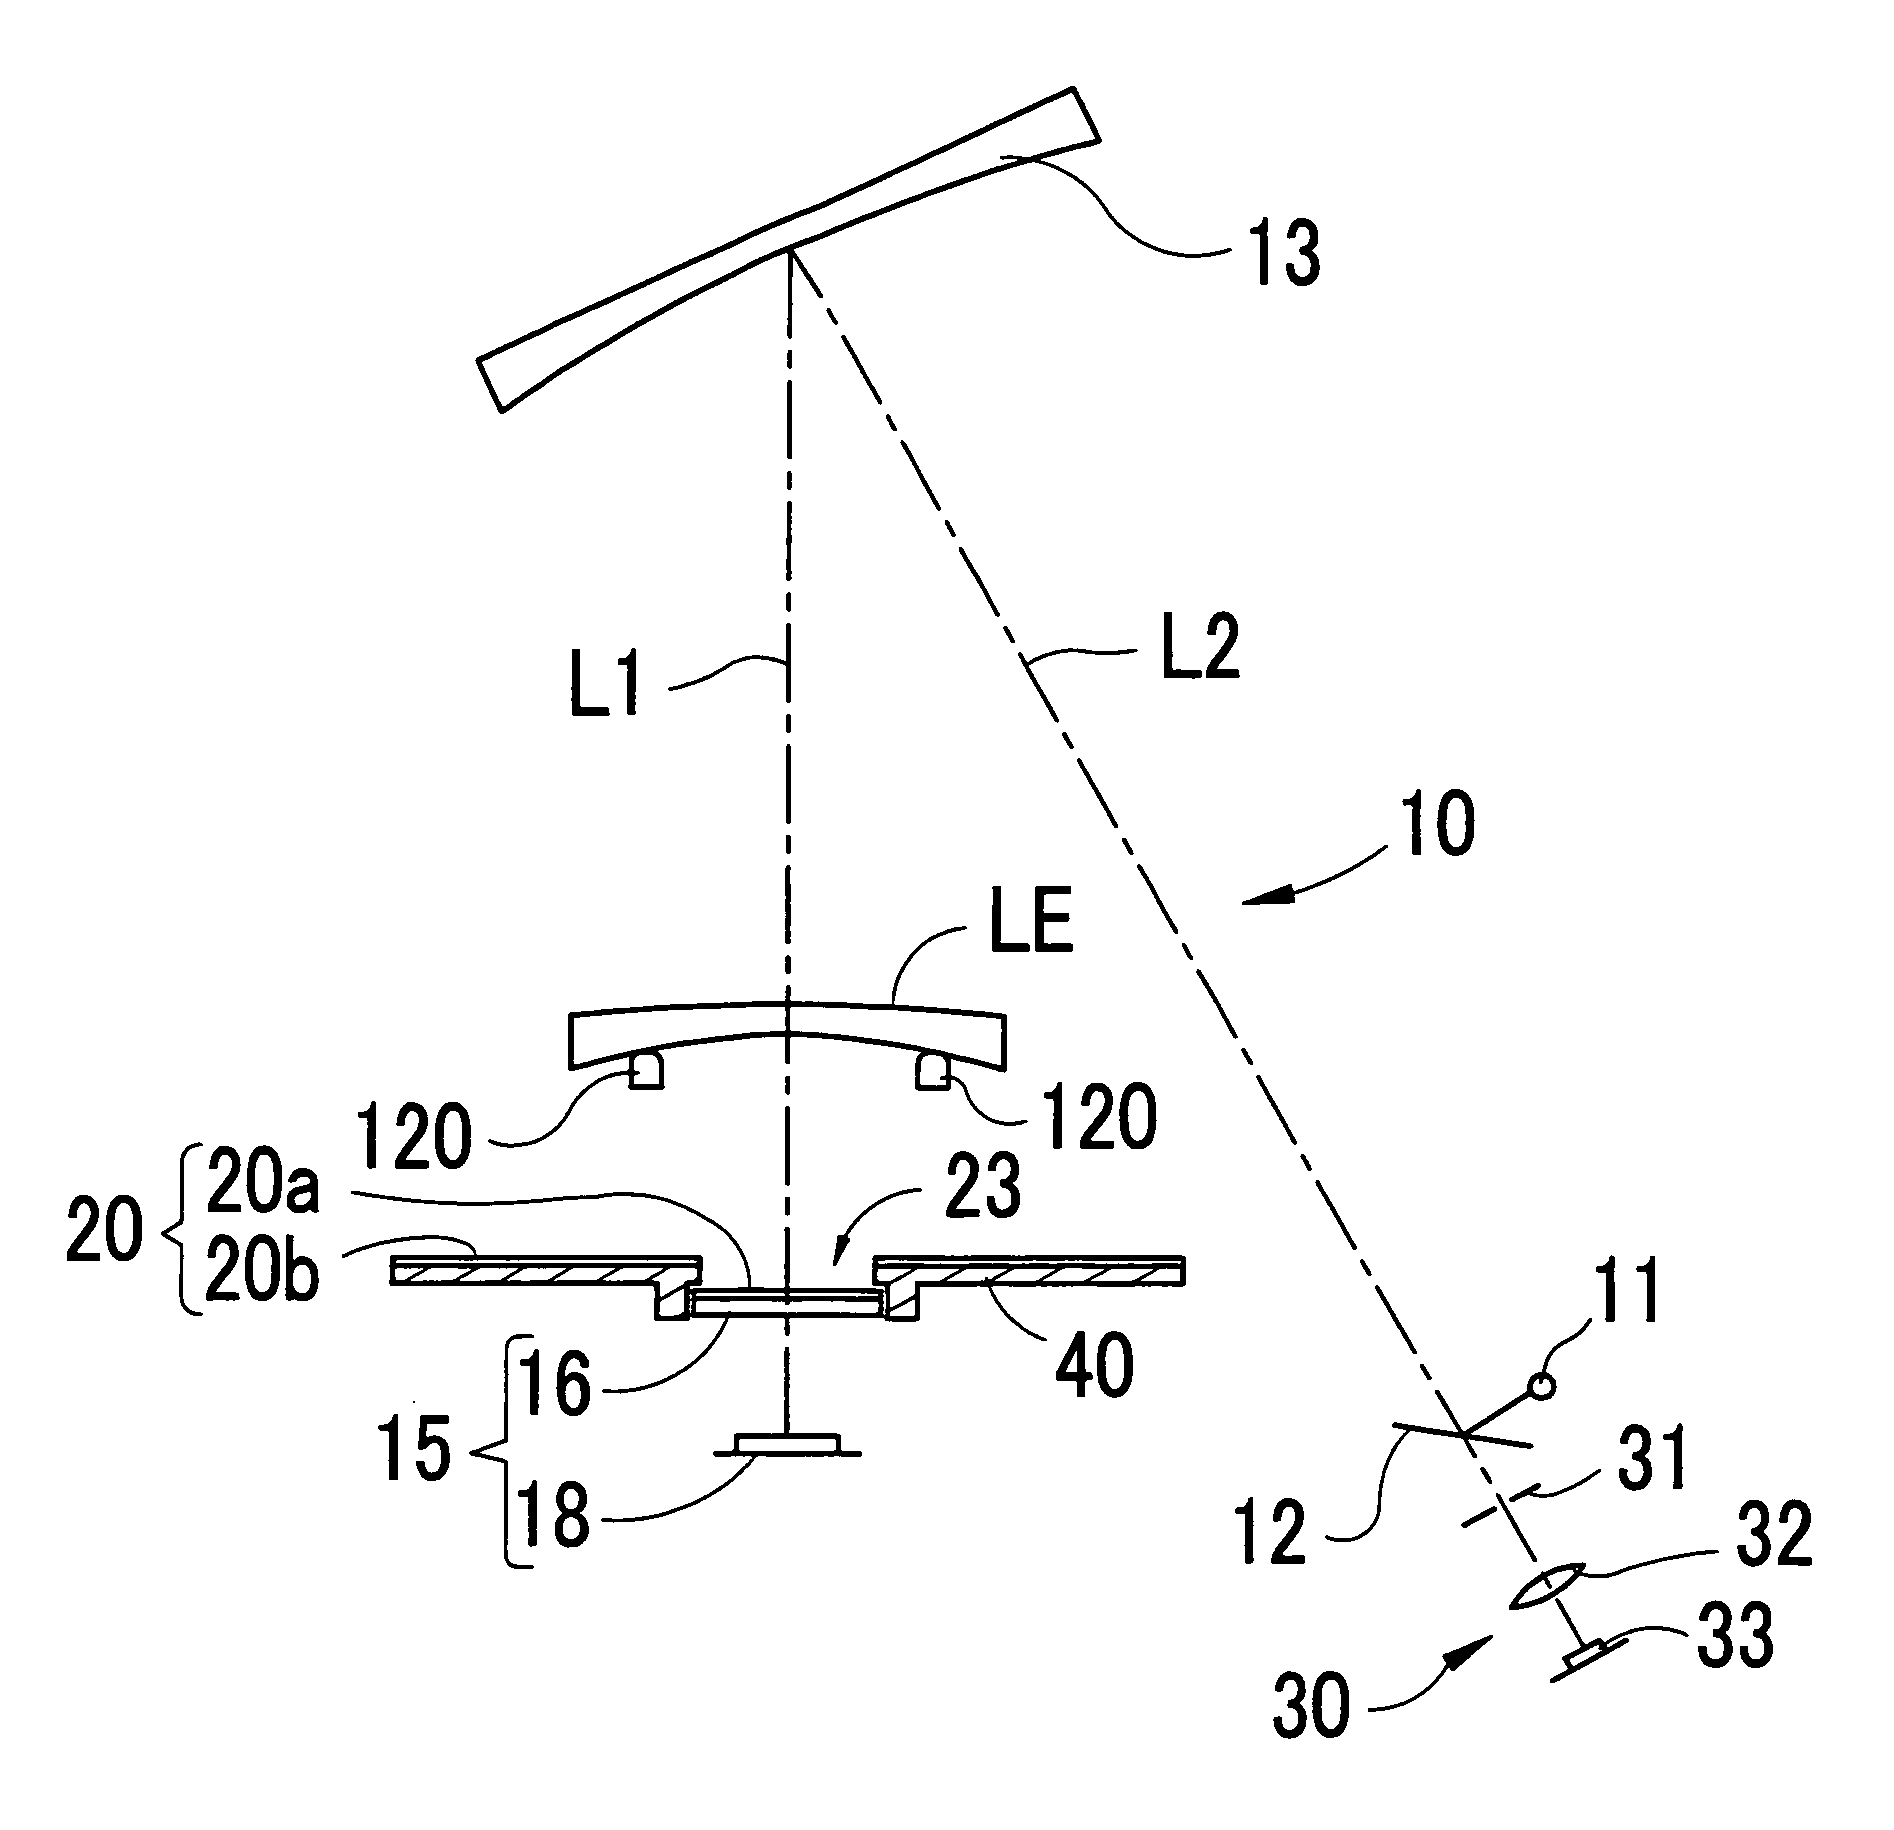 Cup attaching apparatus